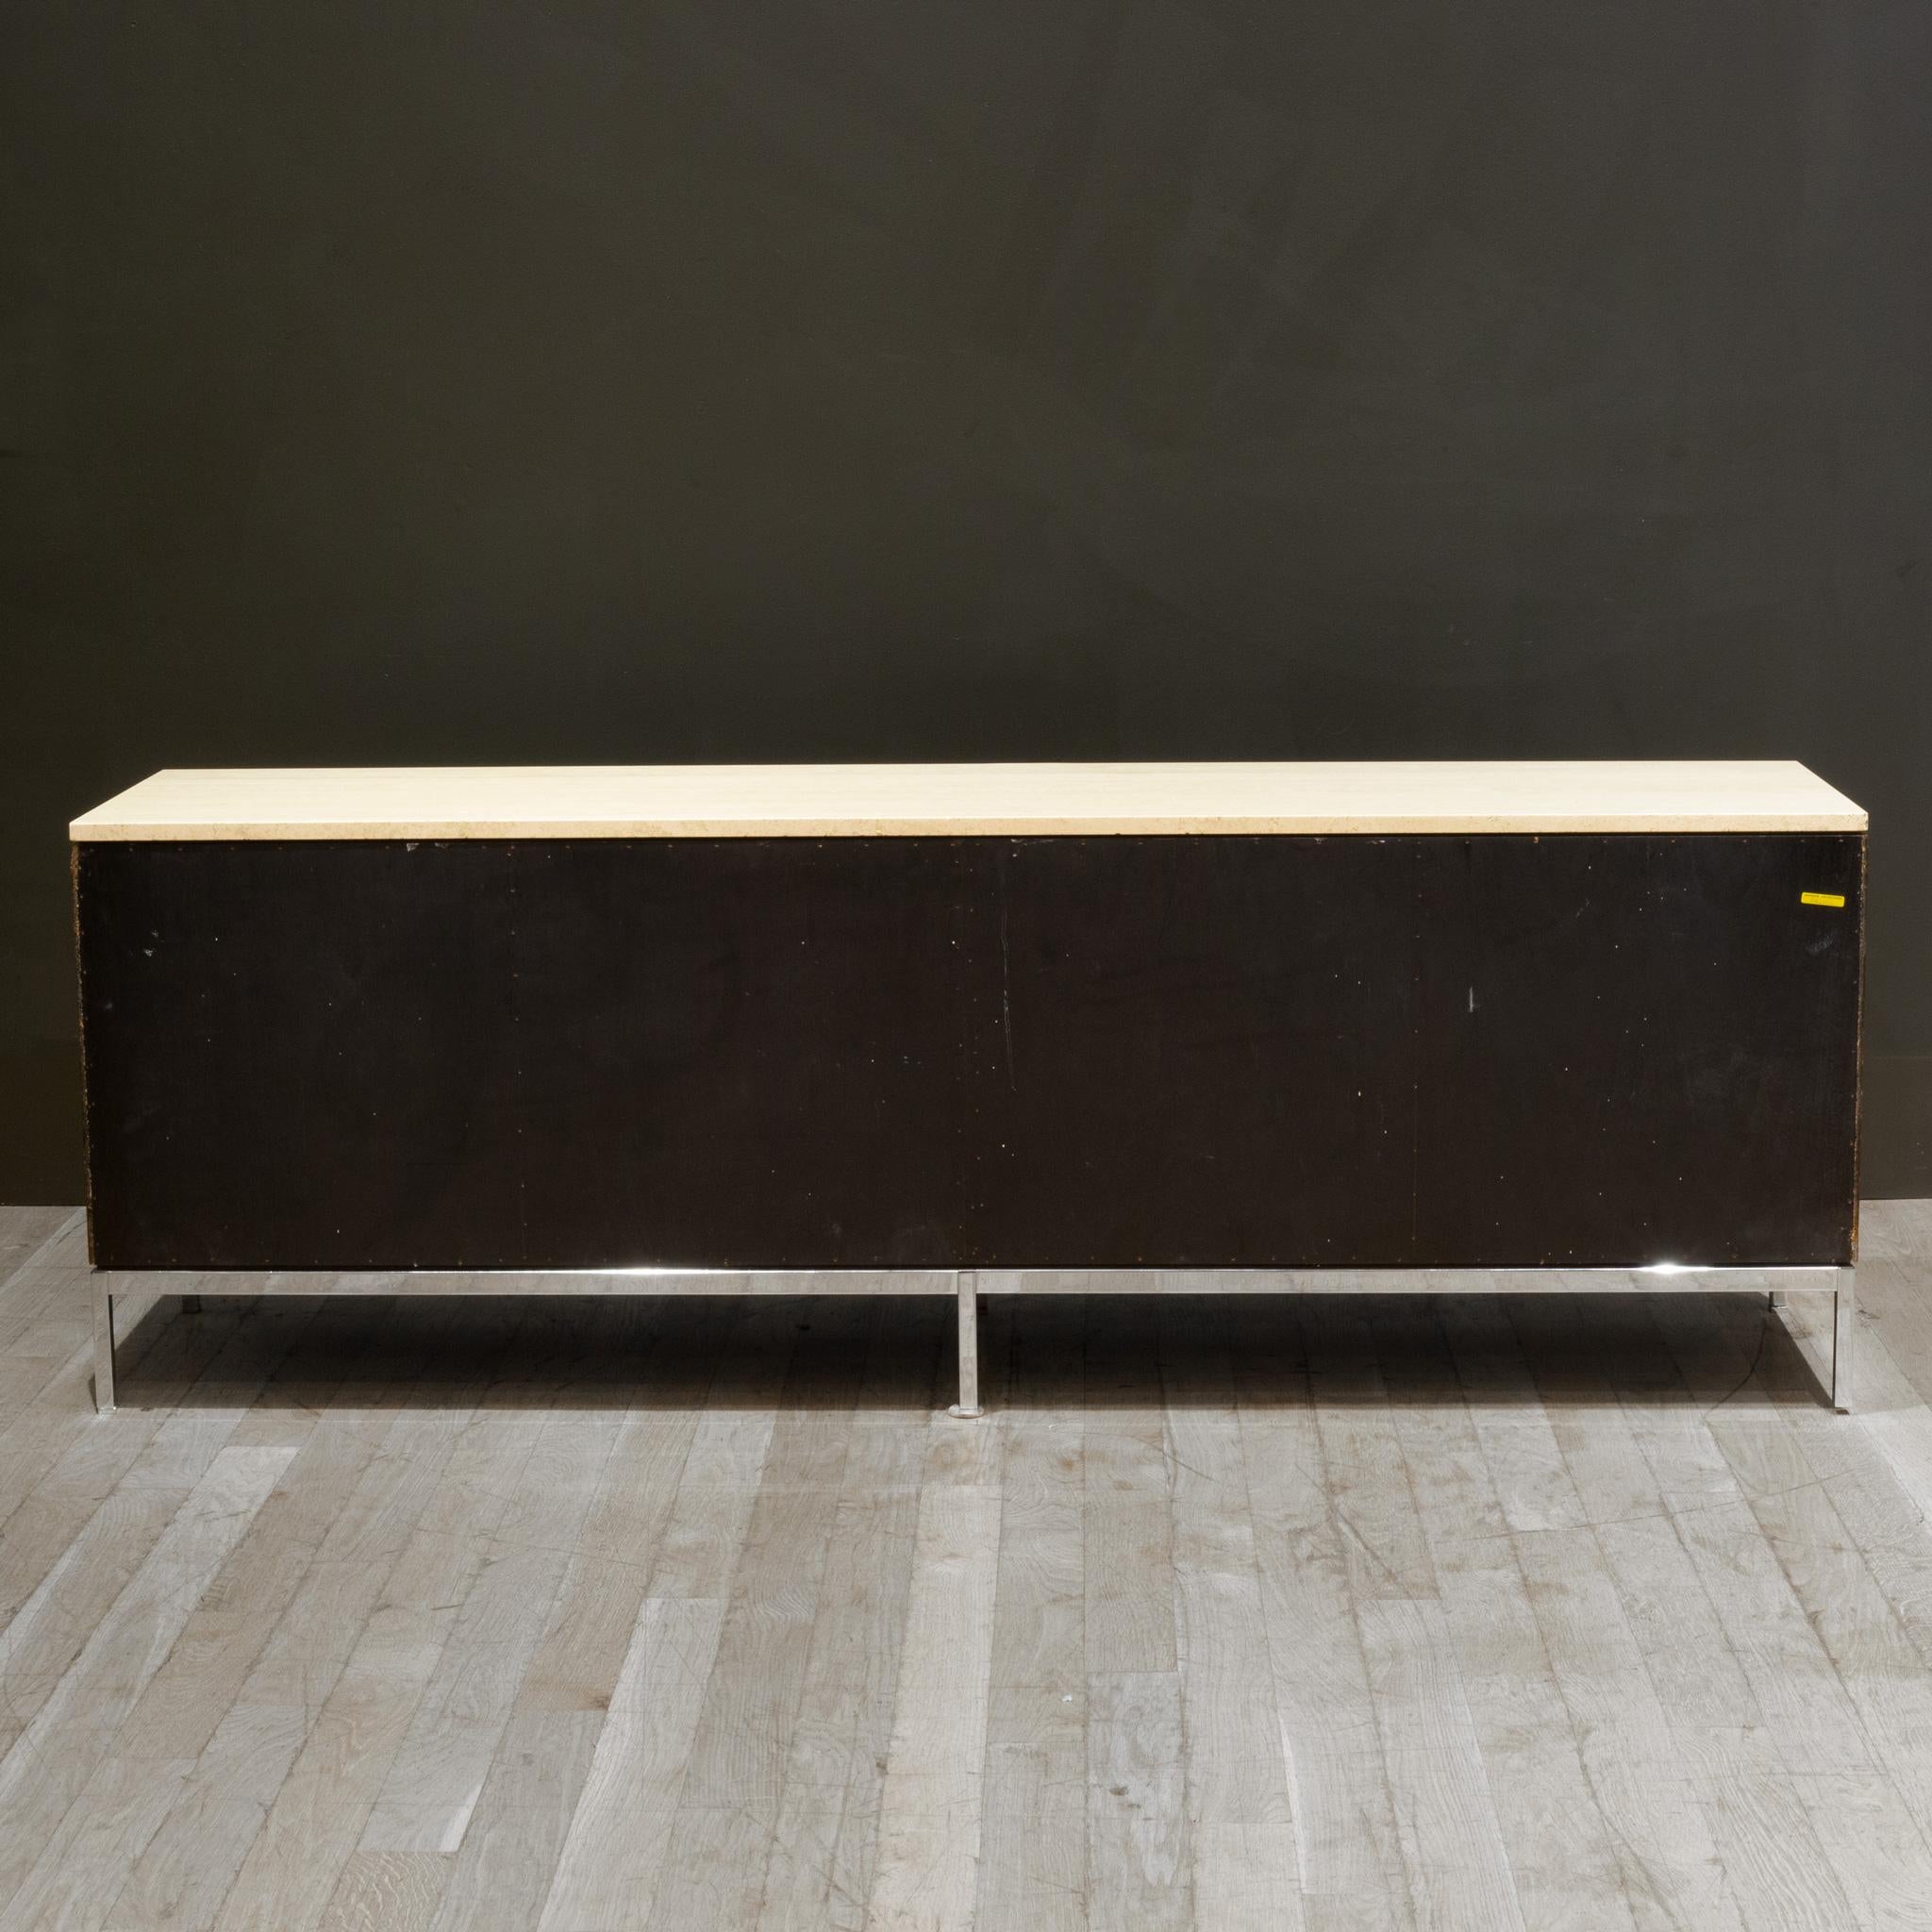 20th Century Mid-century Florence Knoll Rosewood Credenza with Travertine Top c.1950-1970